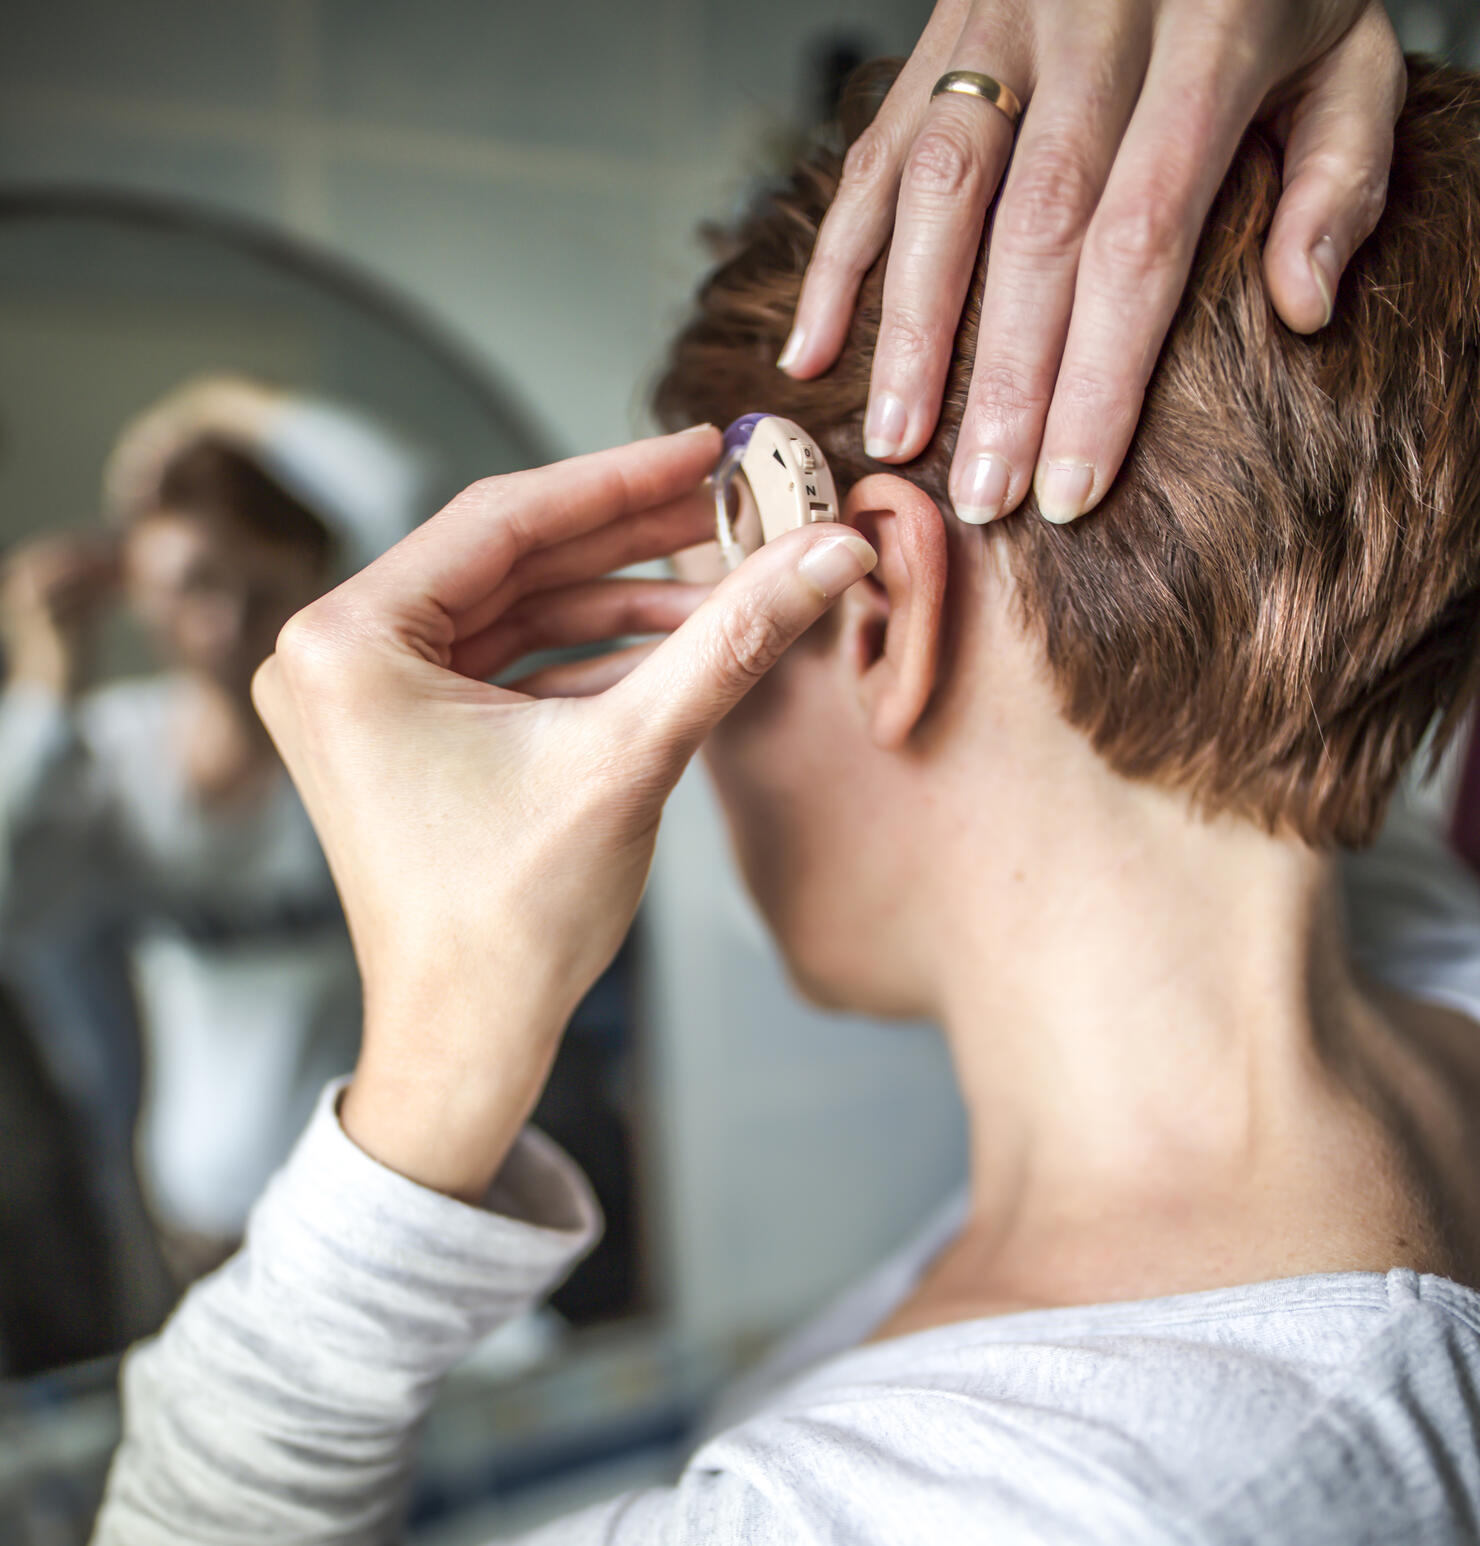 Women inserting hearing aid. Medical concept